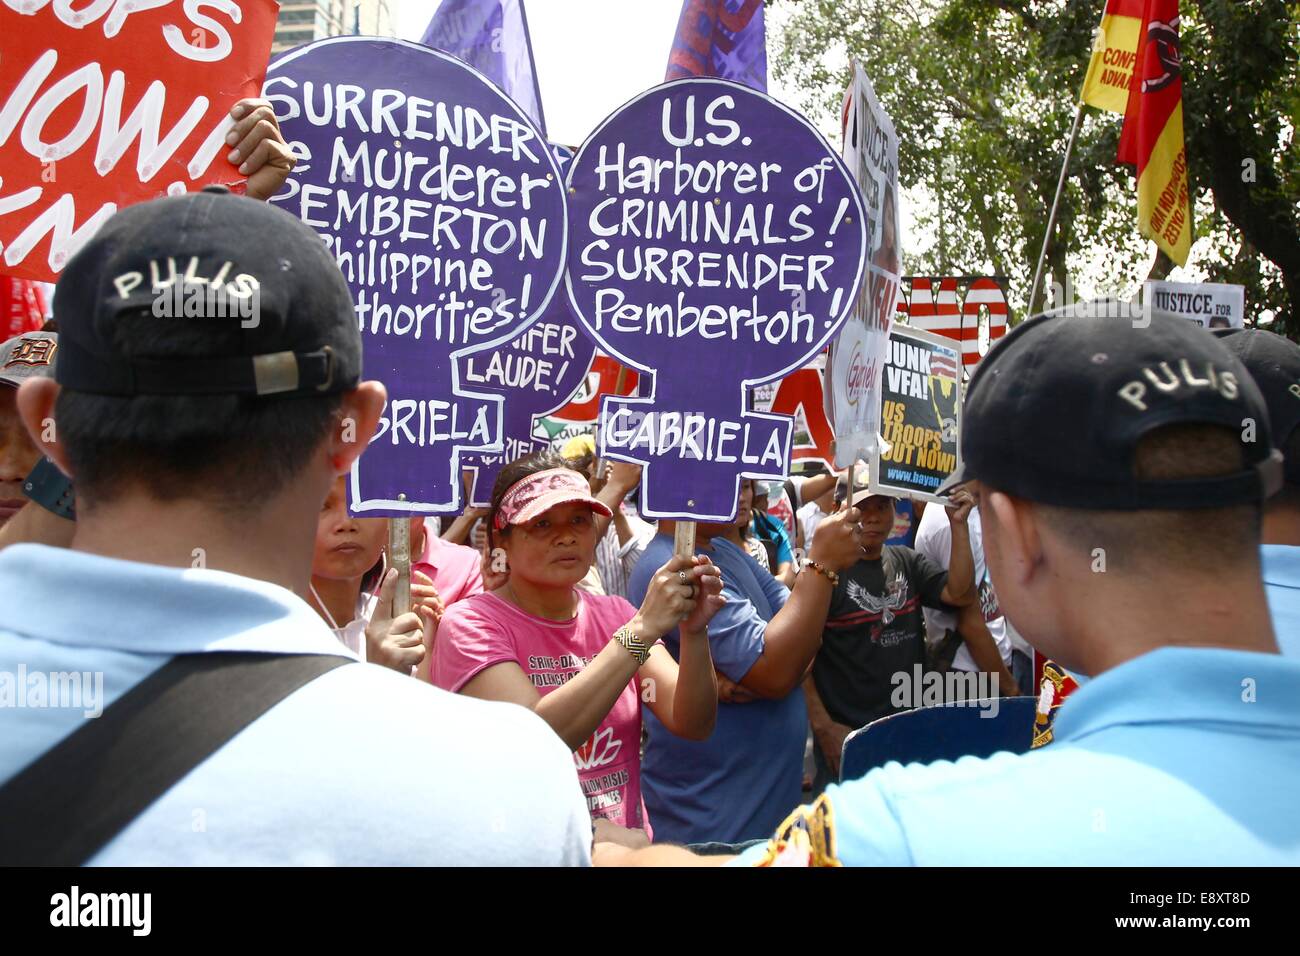 Manila, Philippines. 16th Oct, 2014. Activists hold placards during a protest rally in front of the US Embassy in Manila, Philippines, Oct. 16, 2014. The protesters demand justice for Jeffrey Laude, who was suspected to be killed by US Marine Joseph Scott Pemberton last Saturday in Olongapo City. Credit:  Rouelle Umali/Xinhua/Alamy Live News Stock Photo